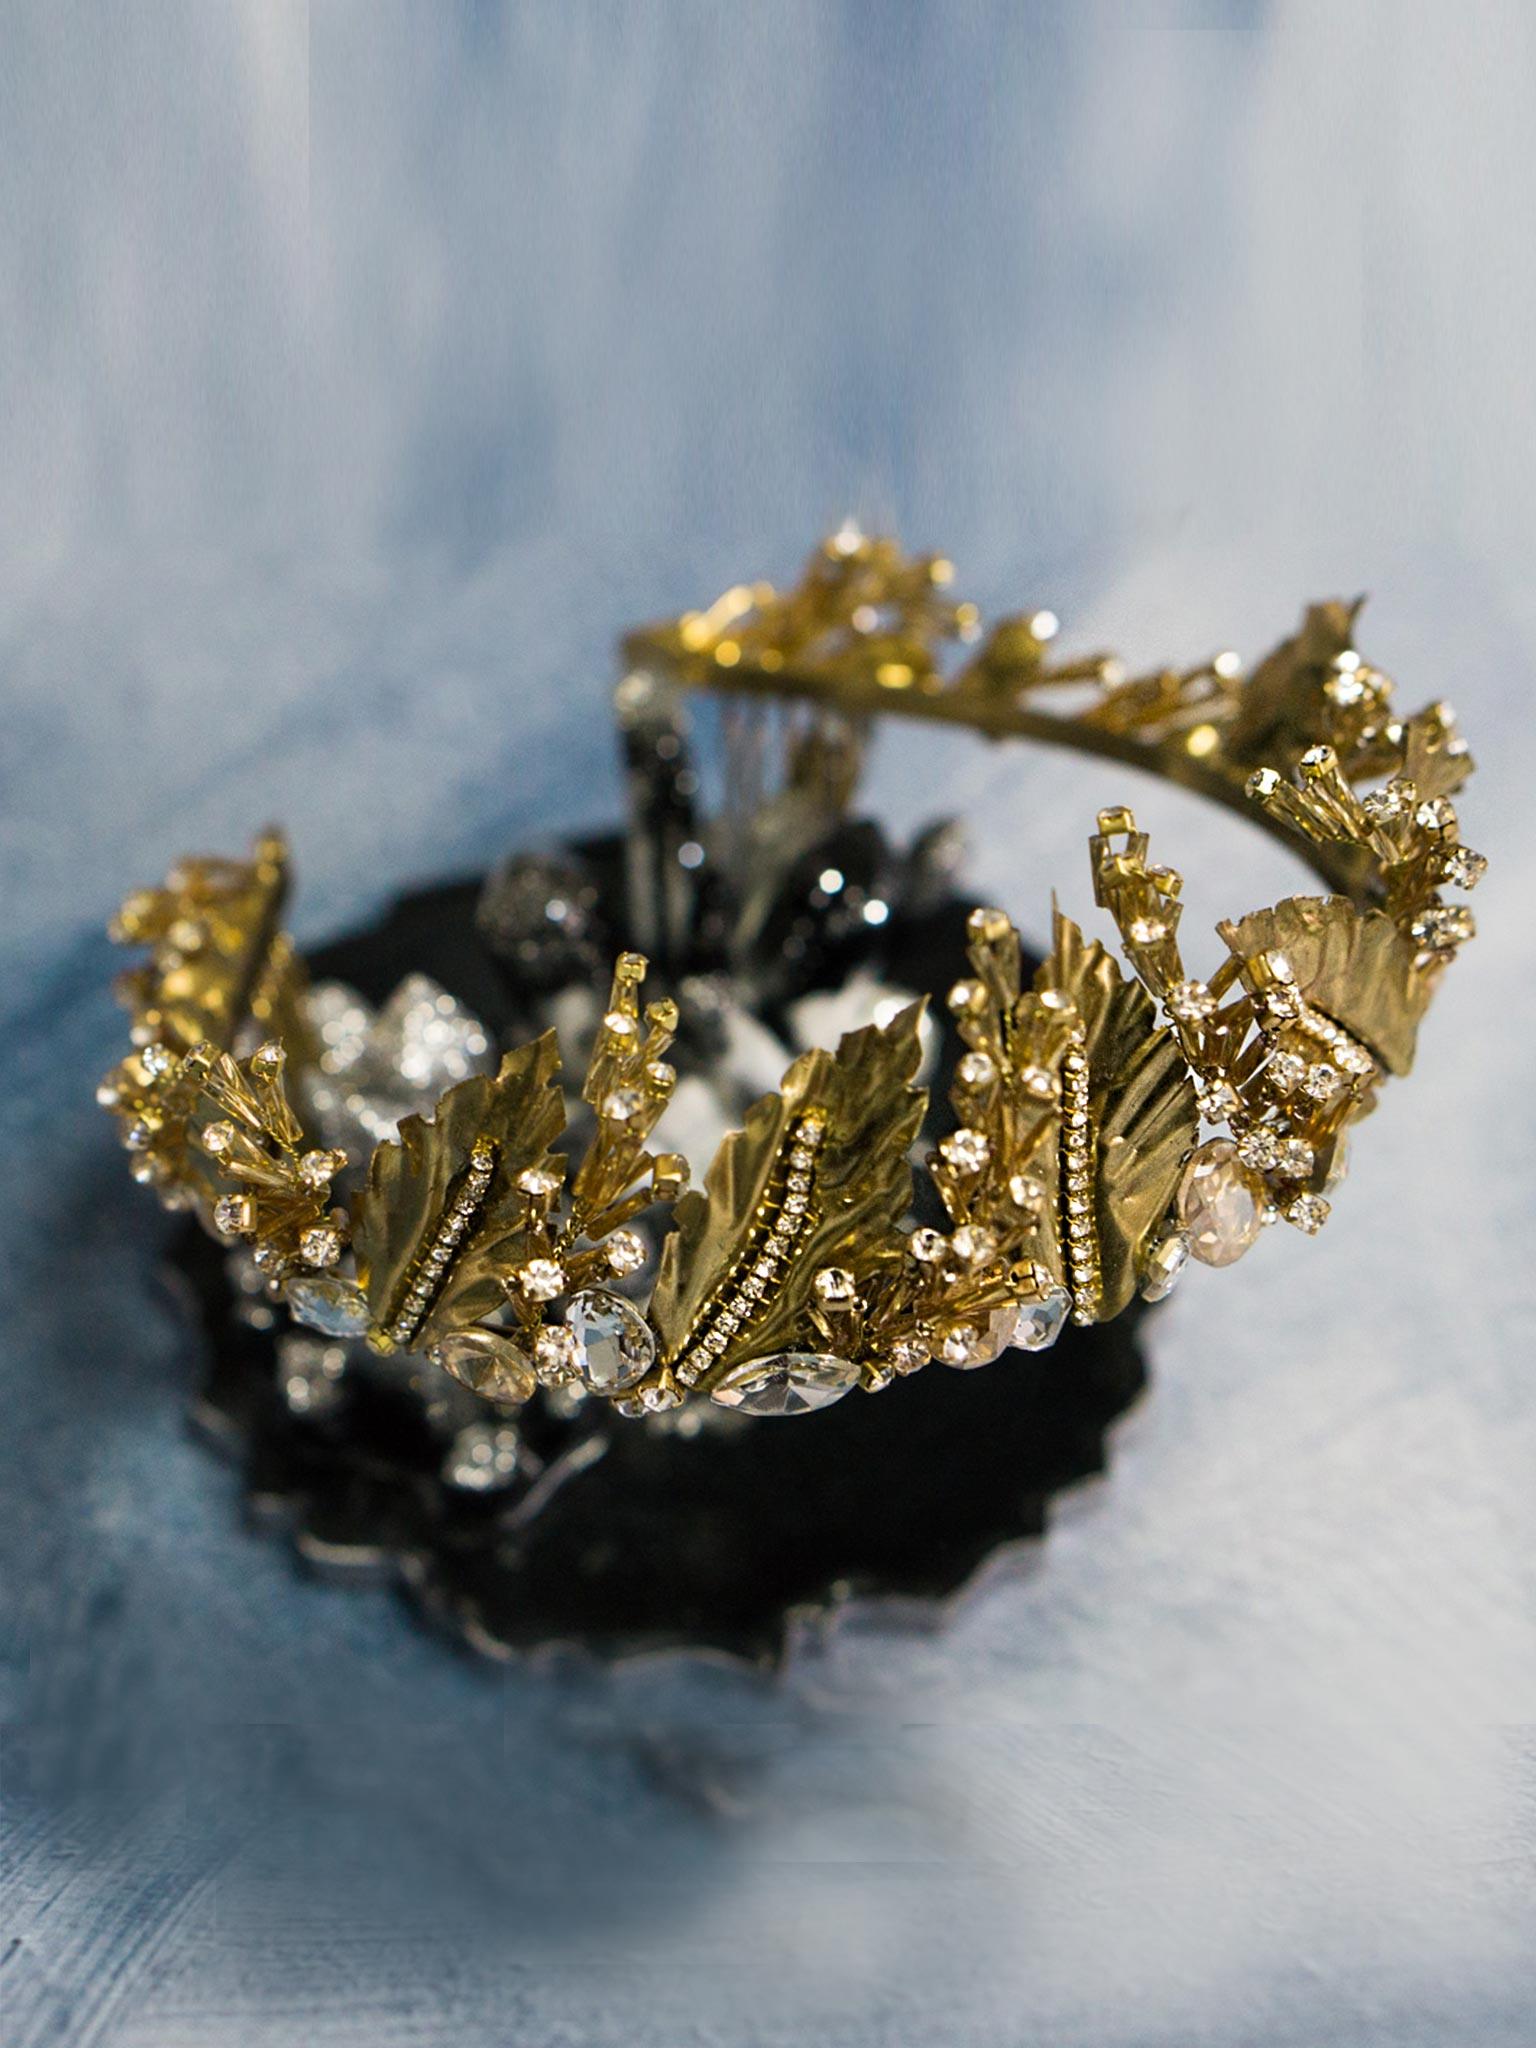 Close-up view of Gold Wedding Crown with Leaves and Crystals on blue background